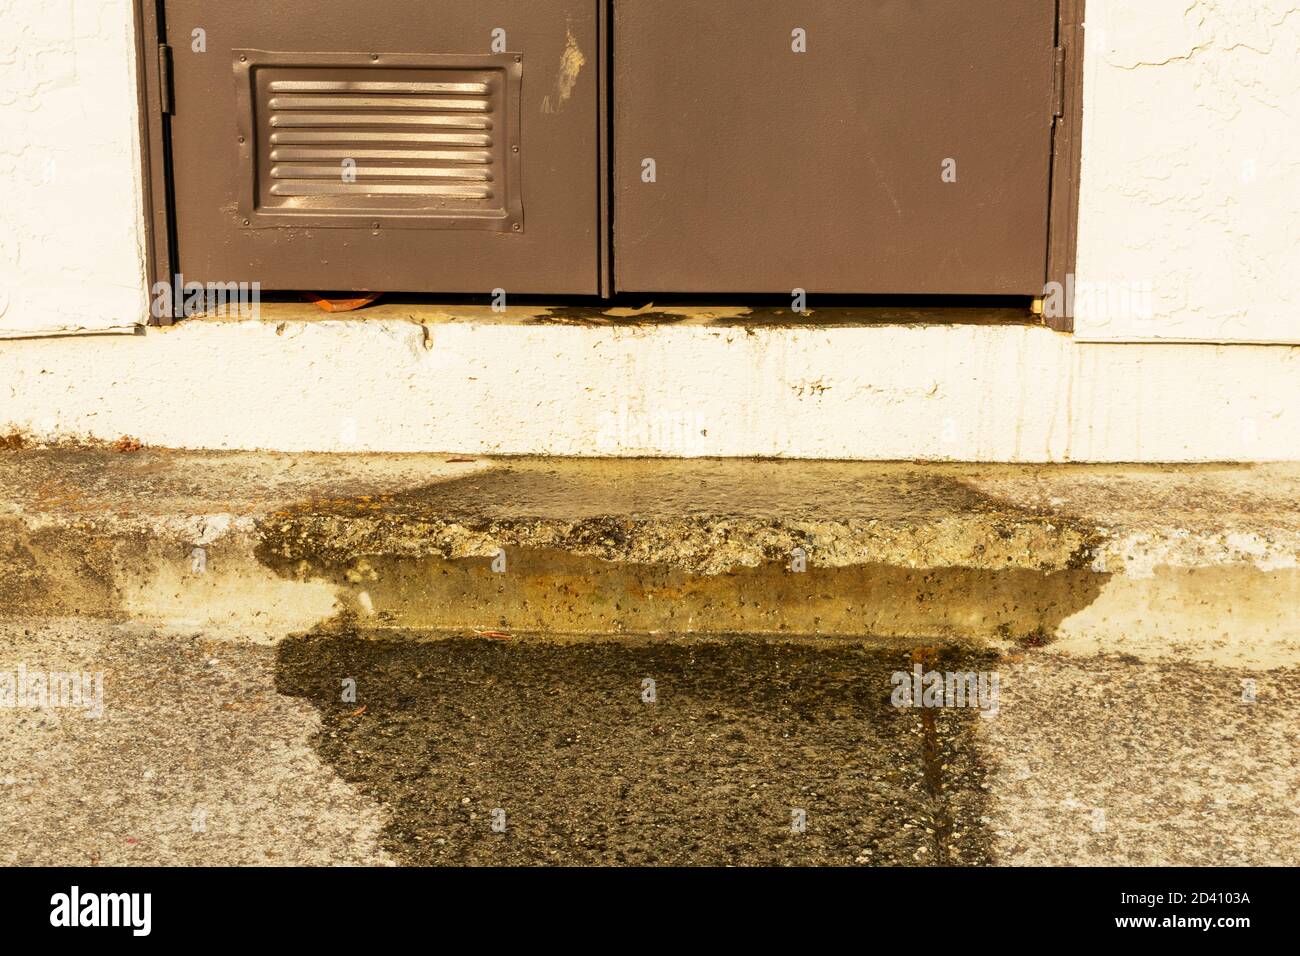 Water coming out from under a closed door of utility closet caused by leaking water heater. Stock Photo